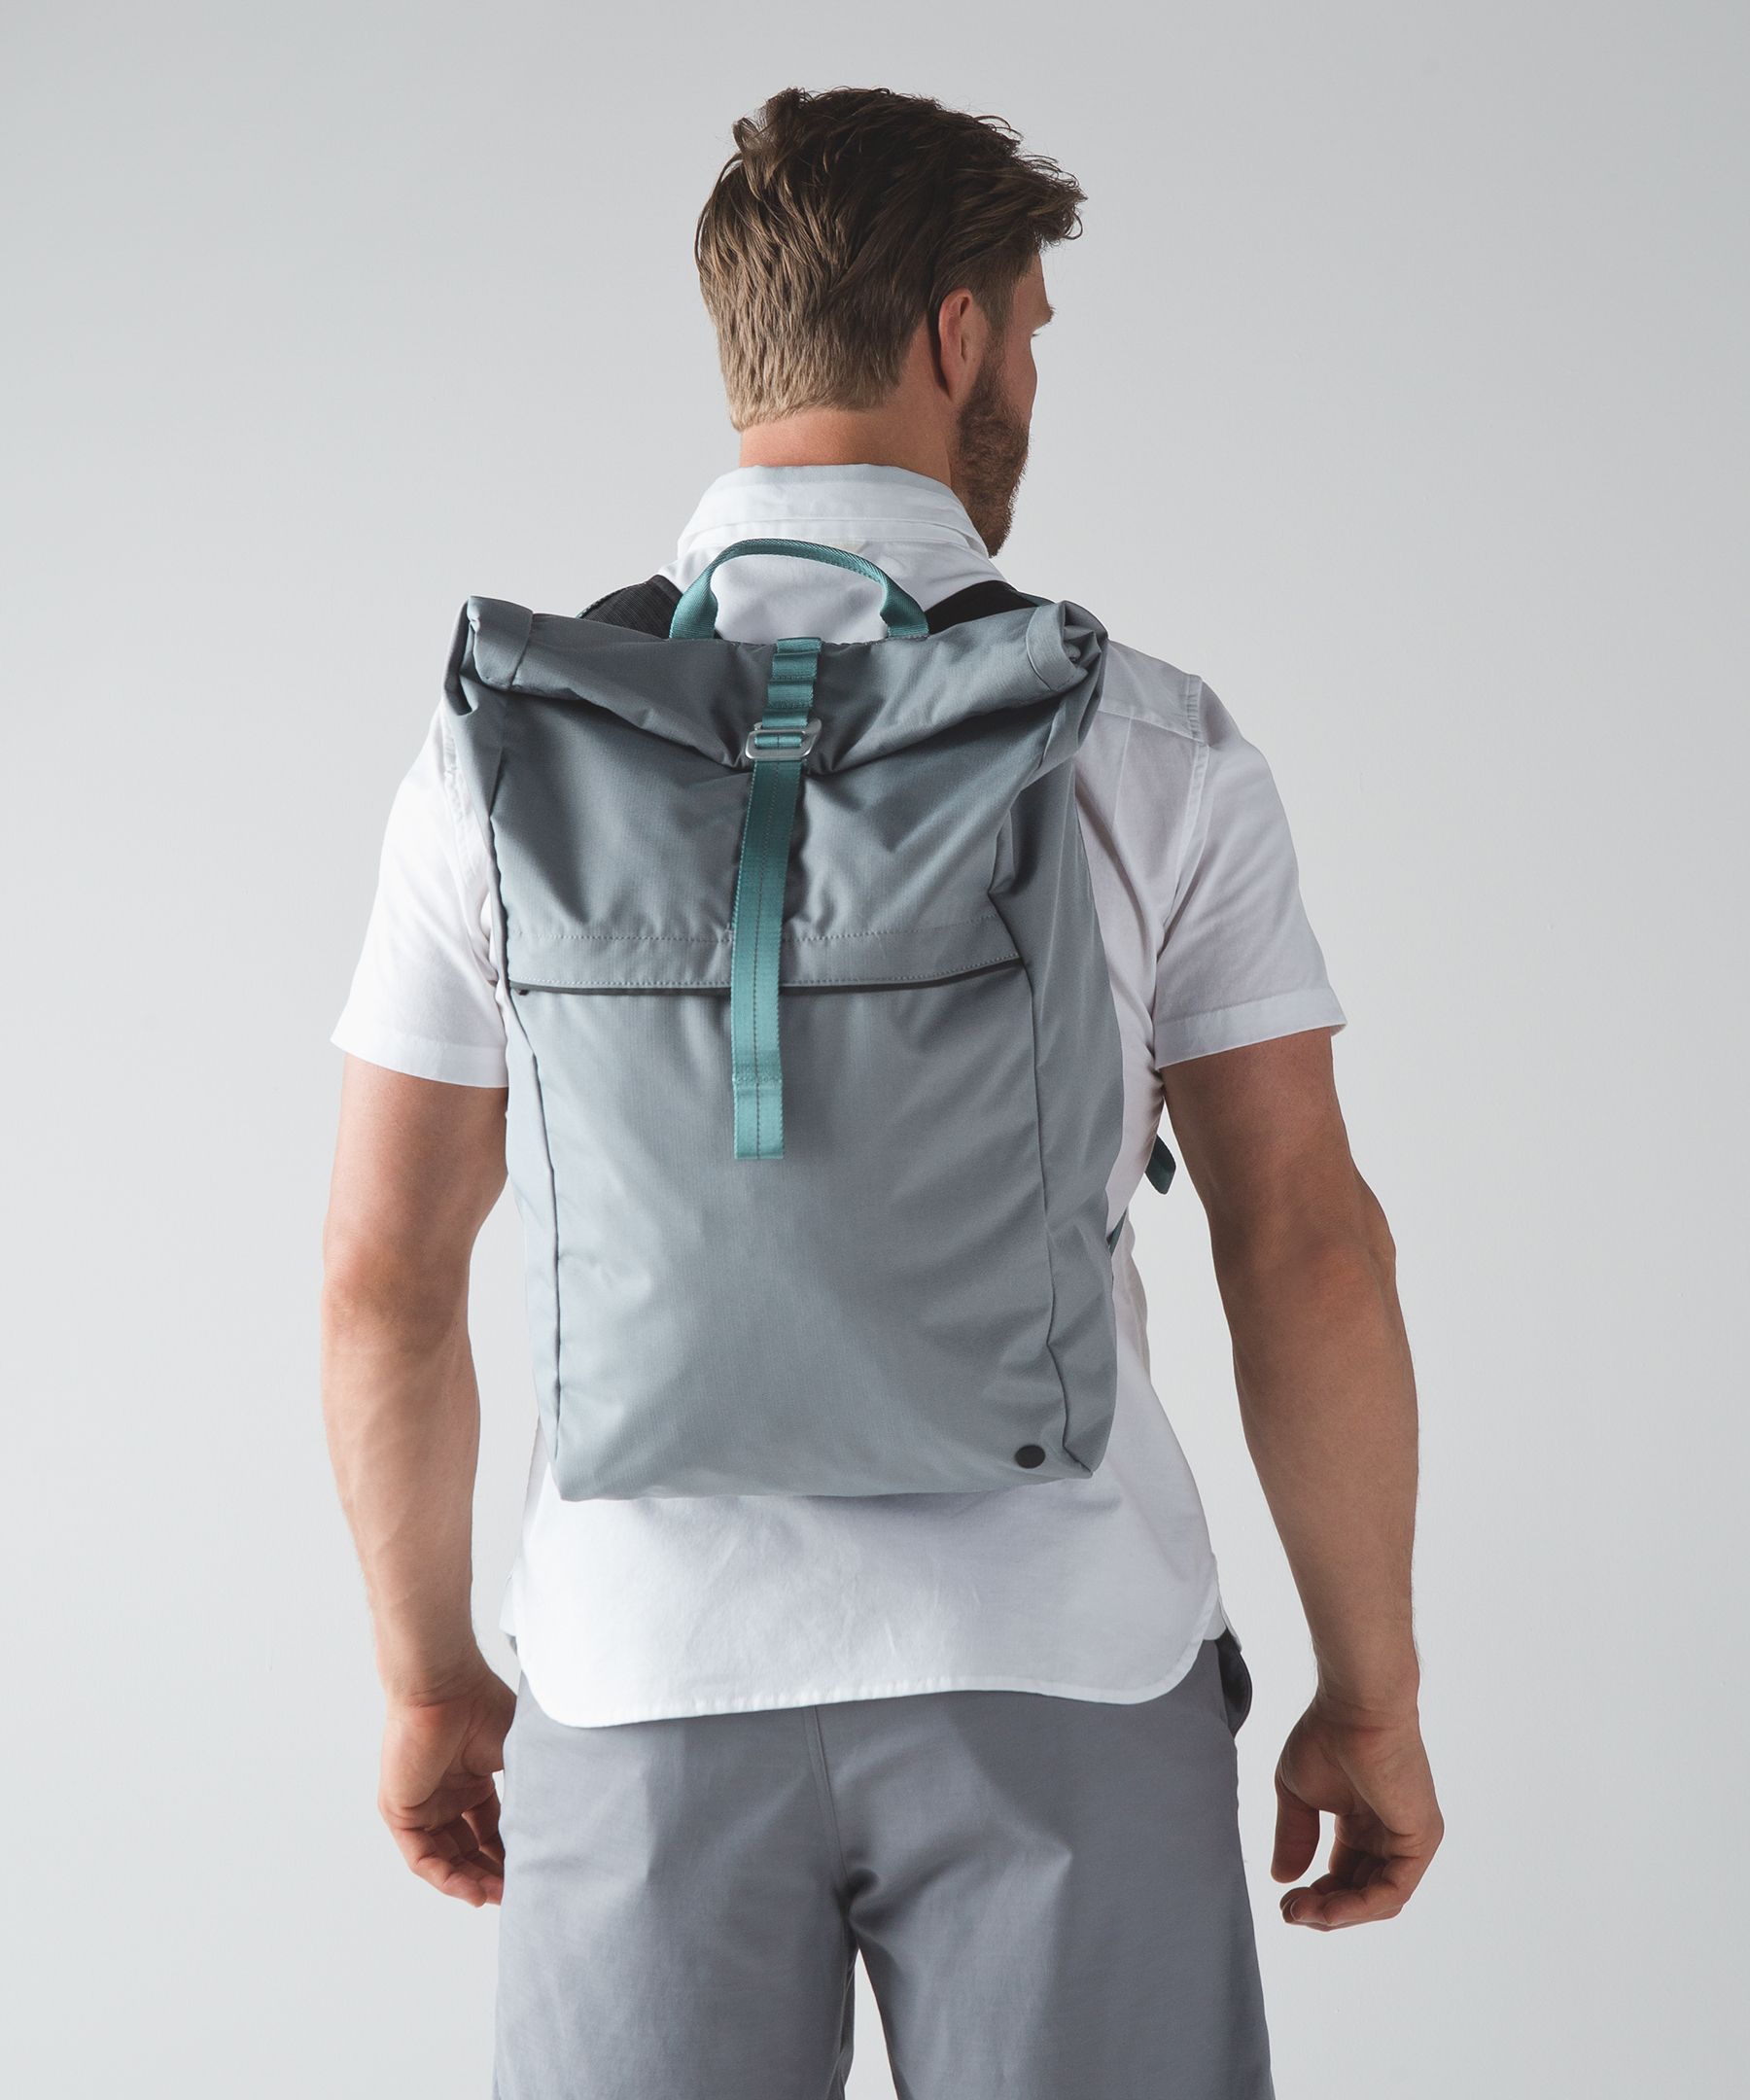 Lululemon In Your Element Backpack In Grey